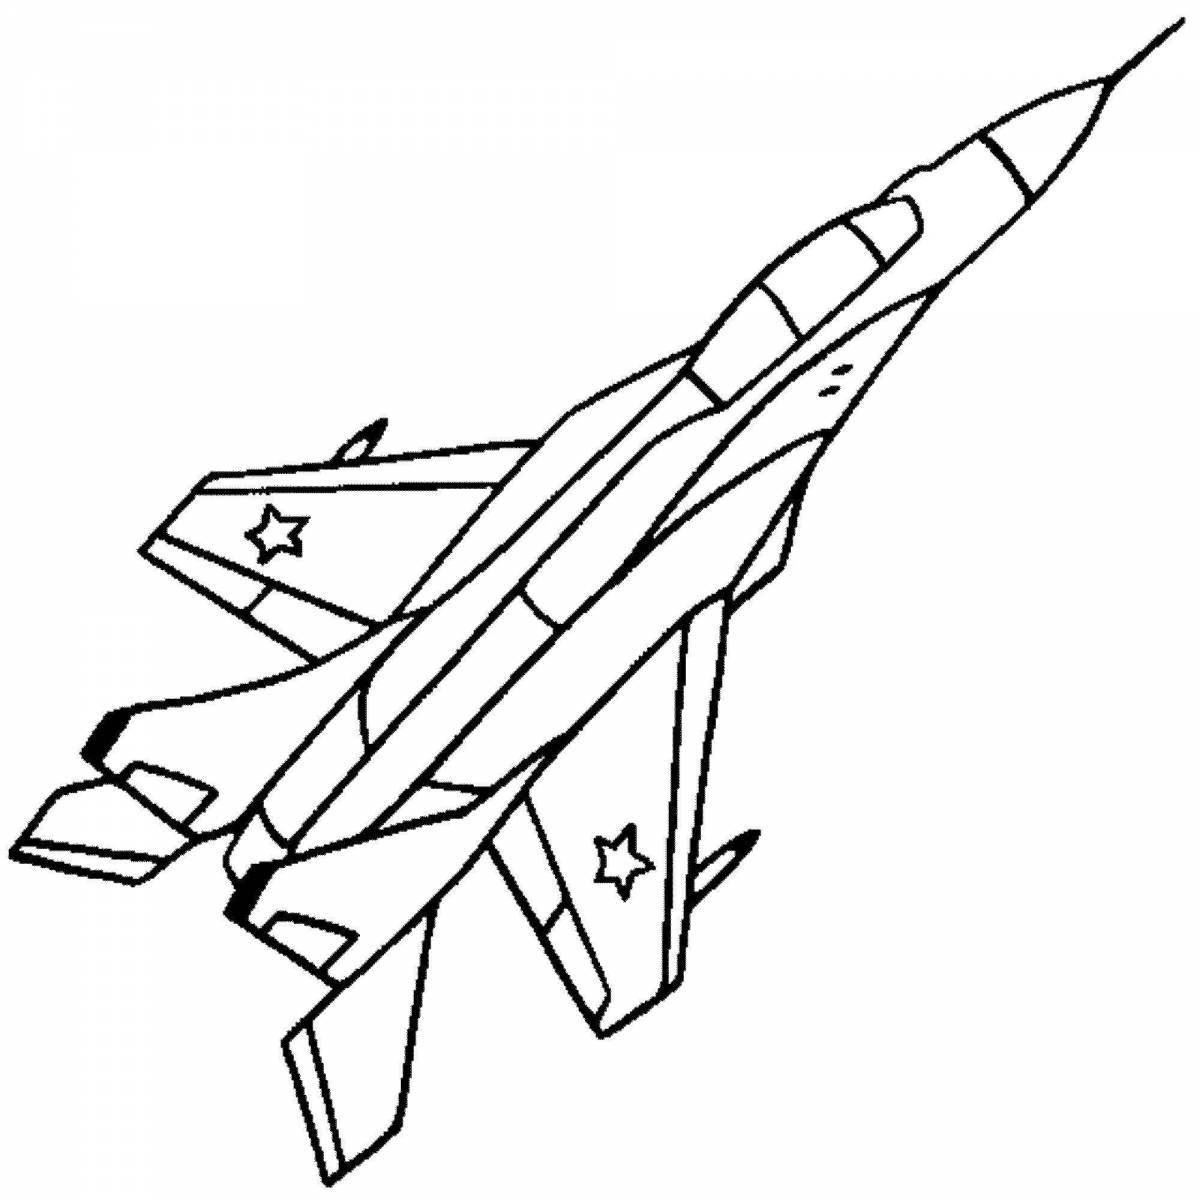 Exquisite military aircraft coloring book for kids